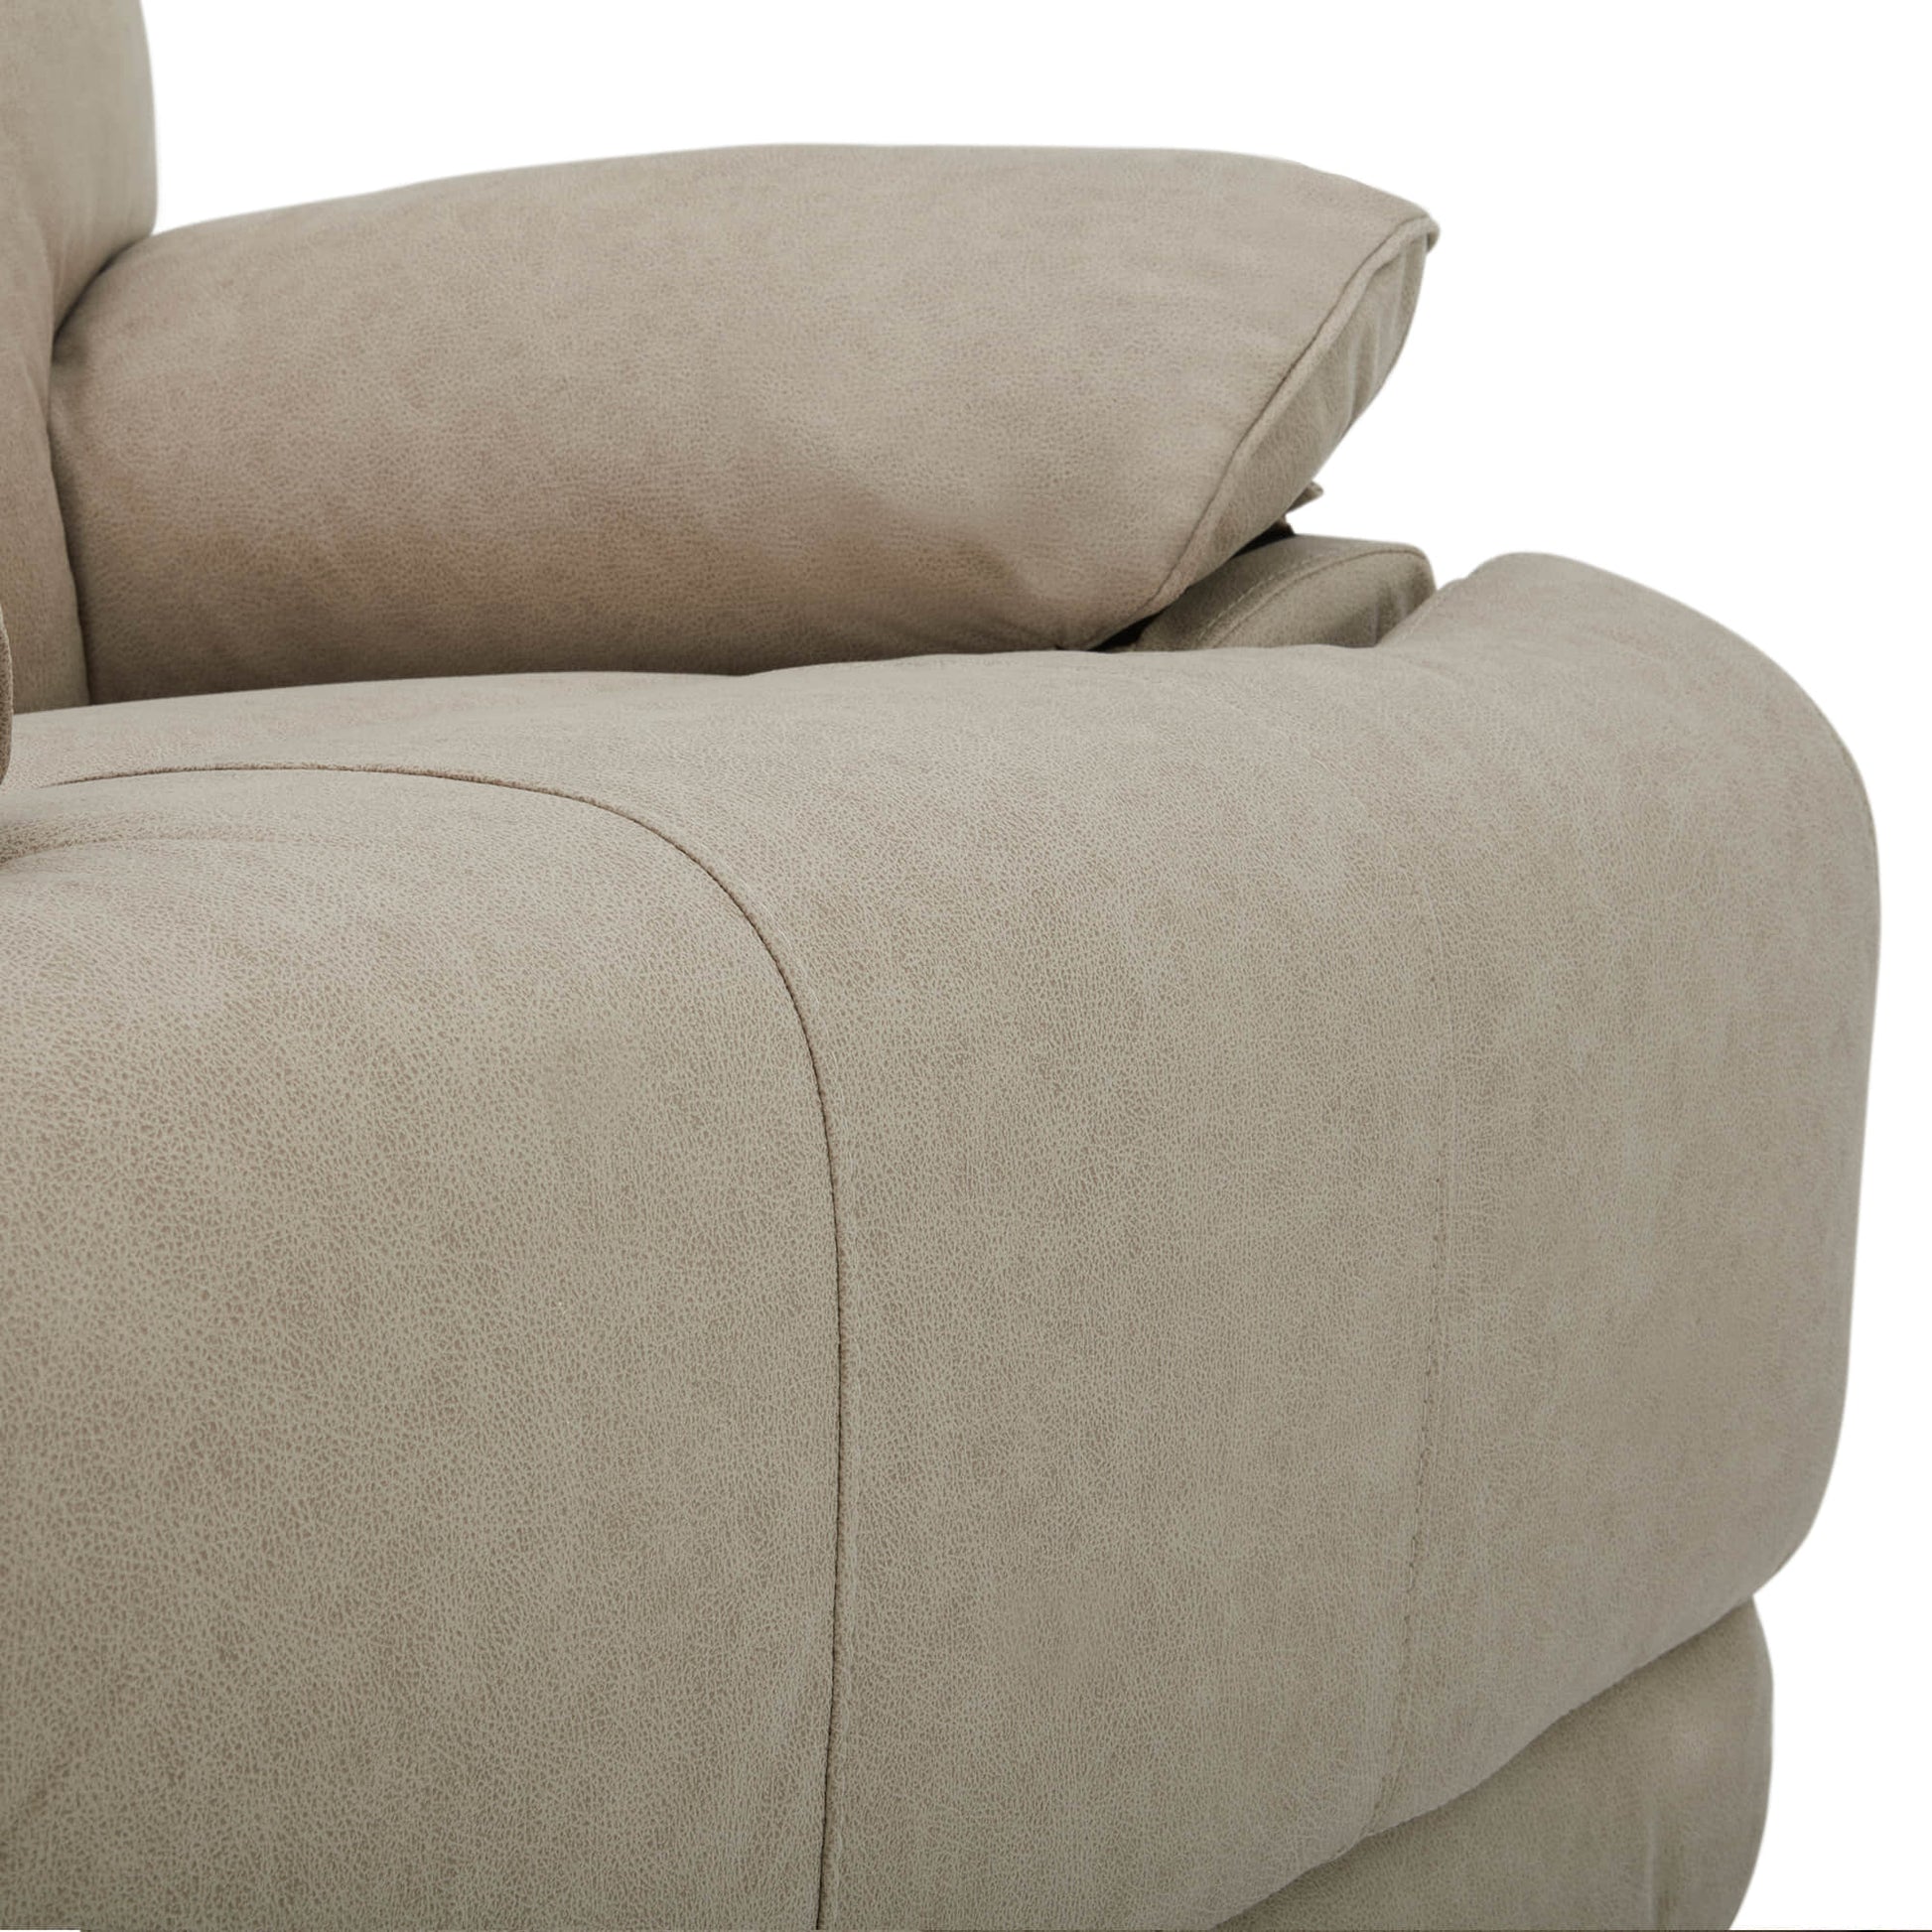 CHITA LIVING-Nya Manual Swivel Glider Recliner-Recliners-Leather Look Fabric-Beige-